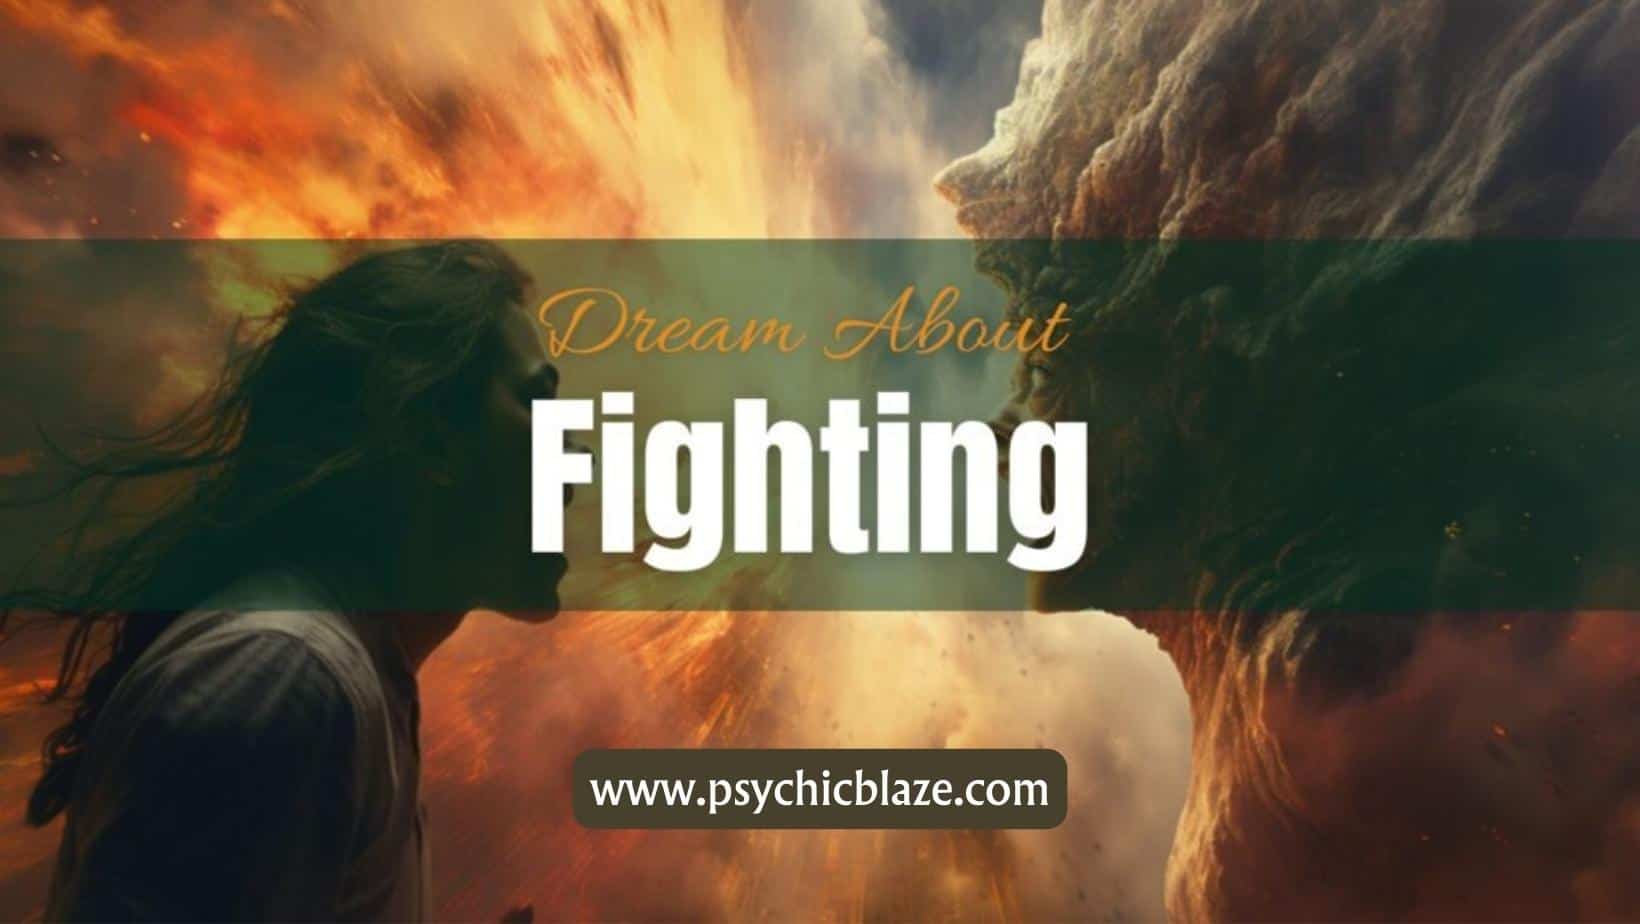 Dream about Fighting